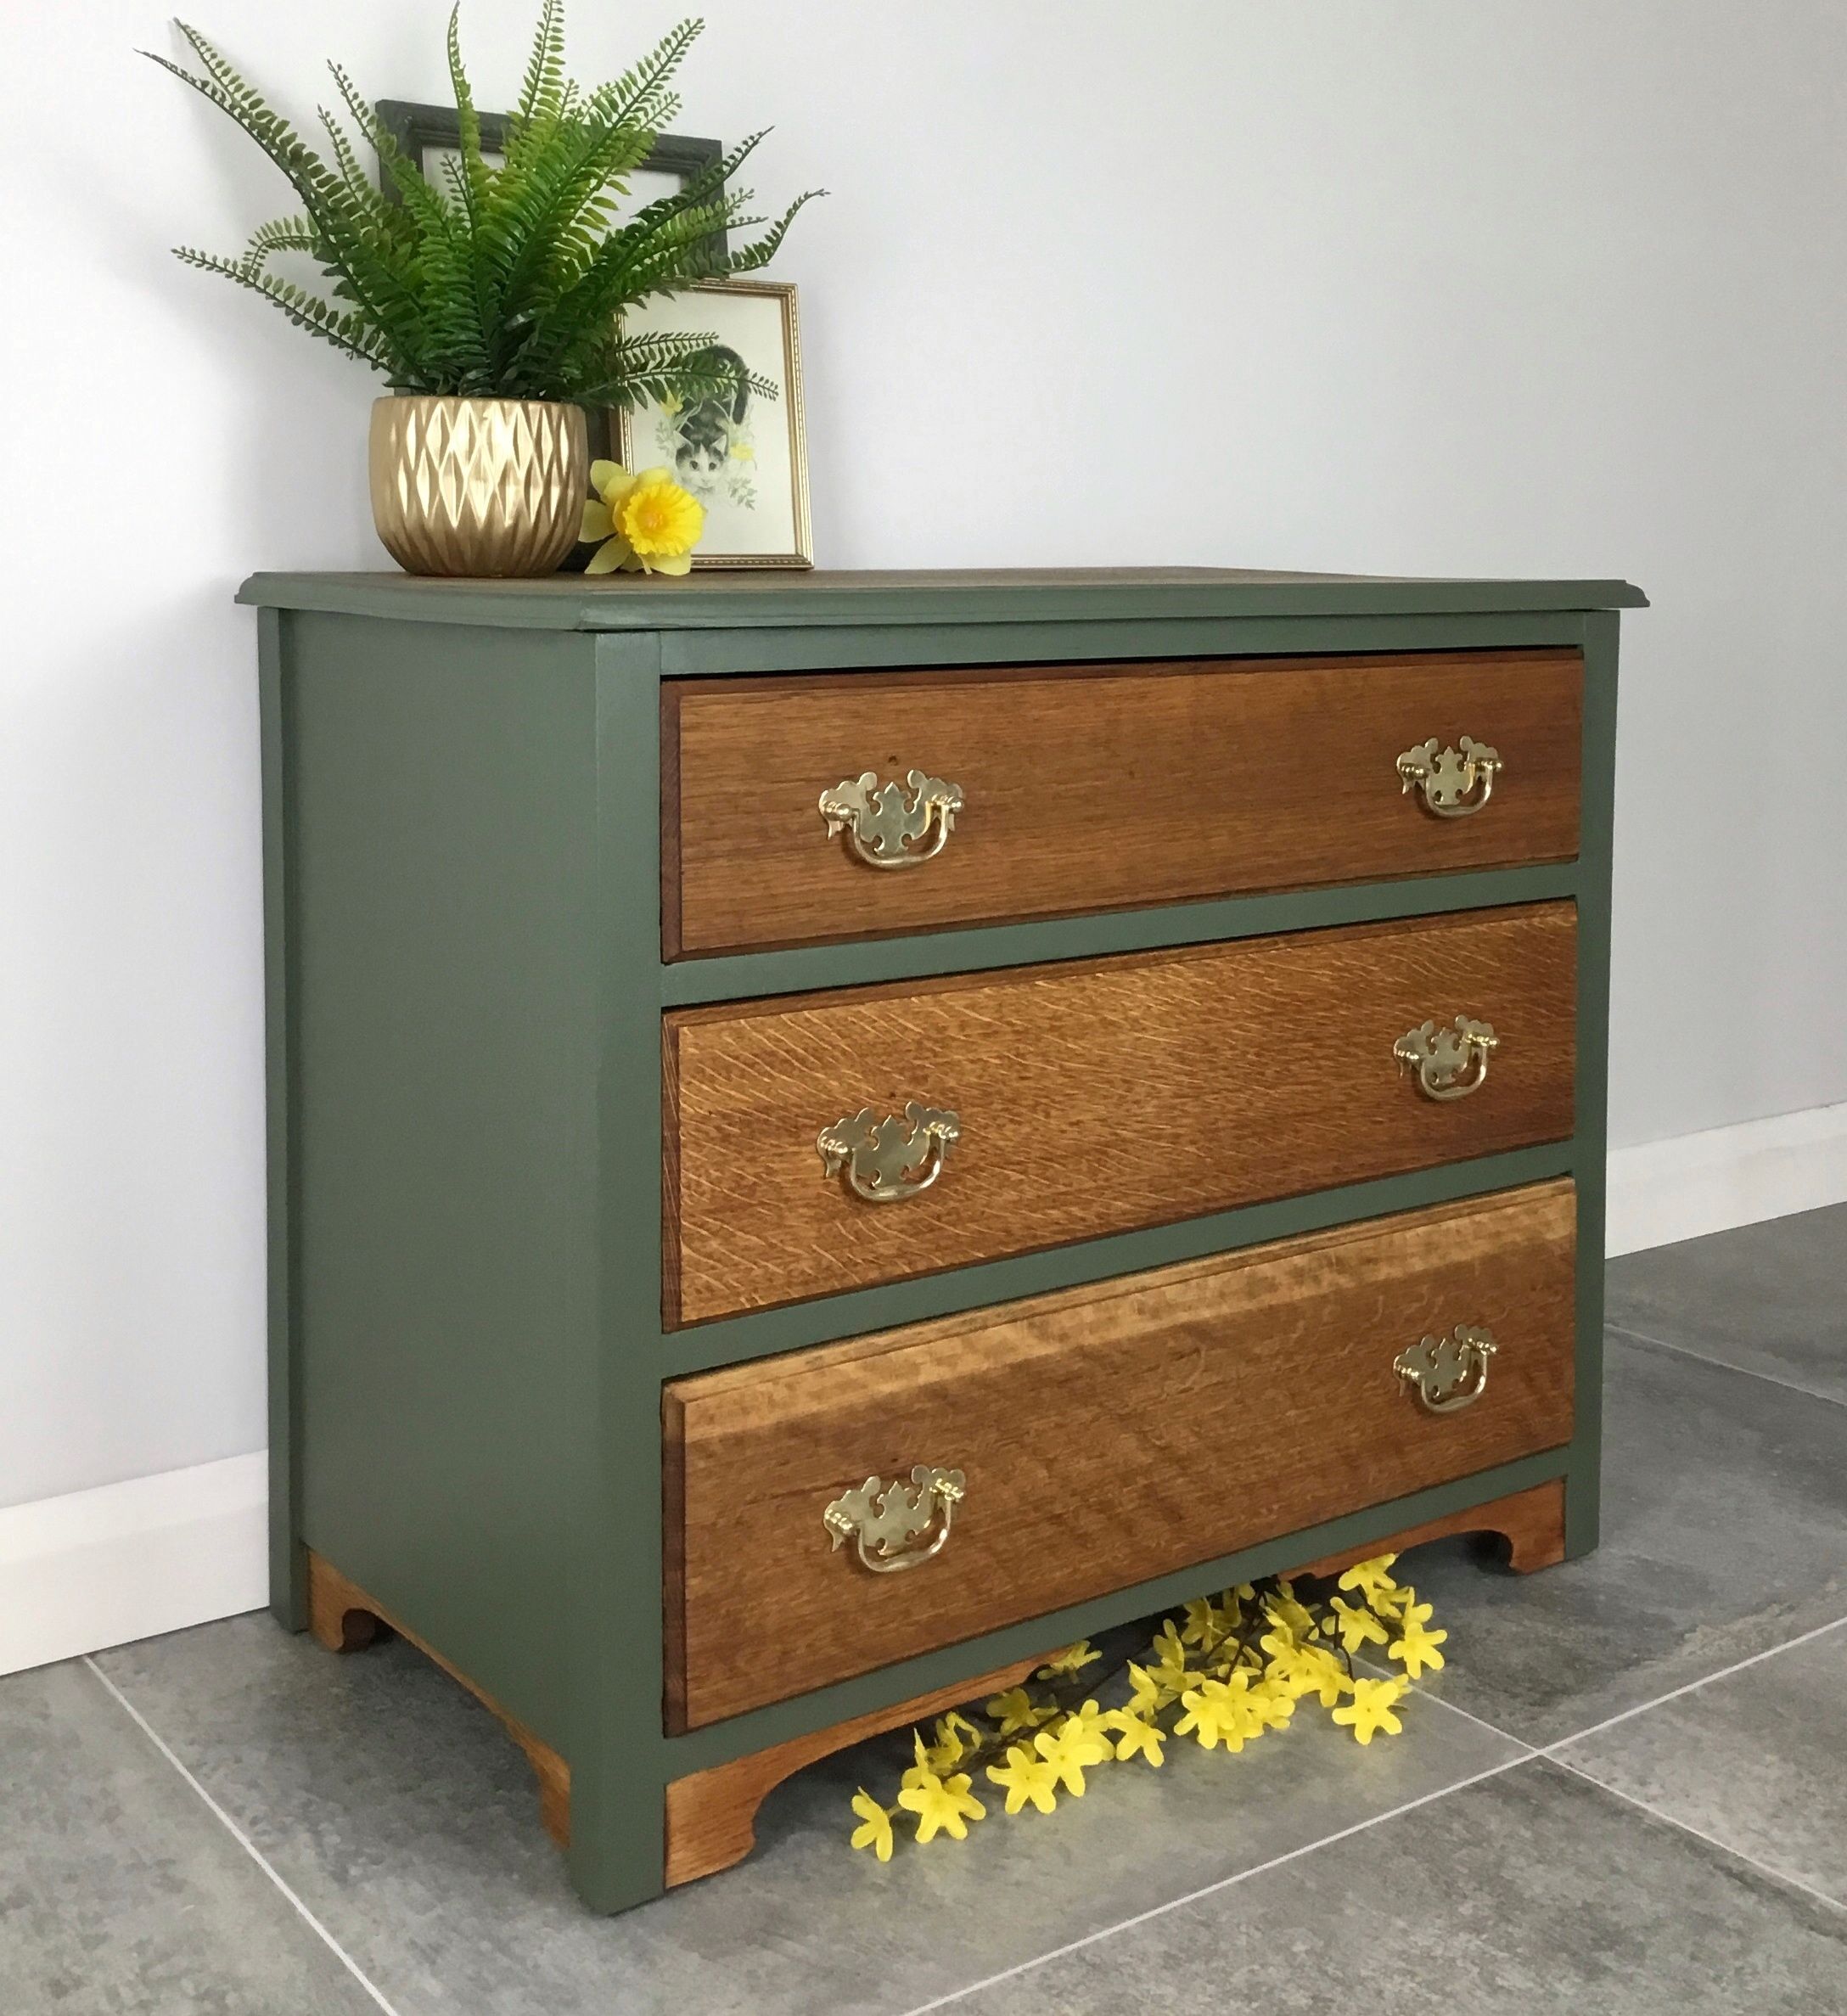 Chest of drawers – a symbol of
aristocracy